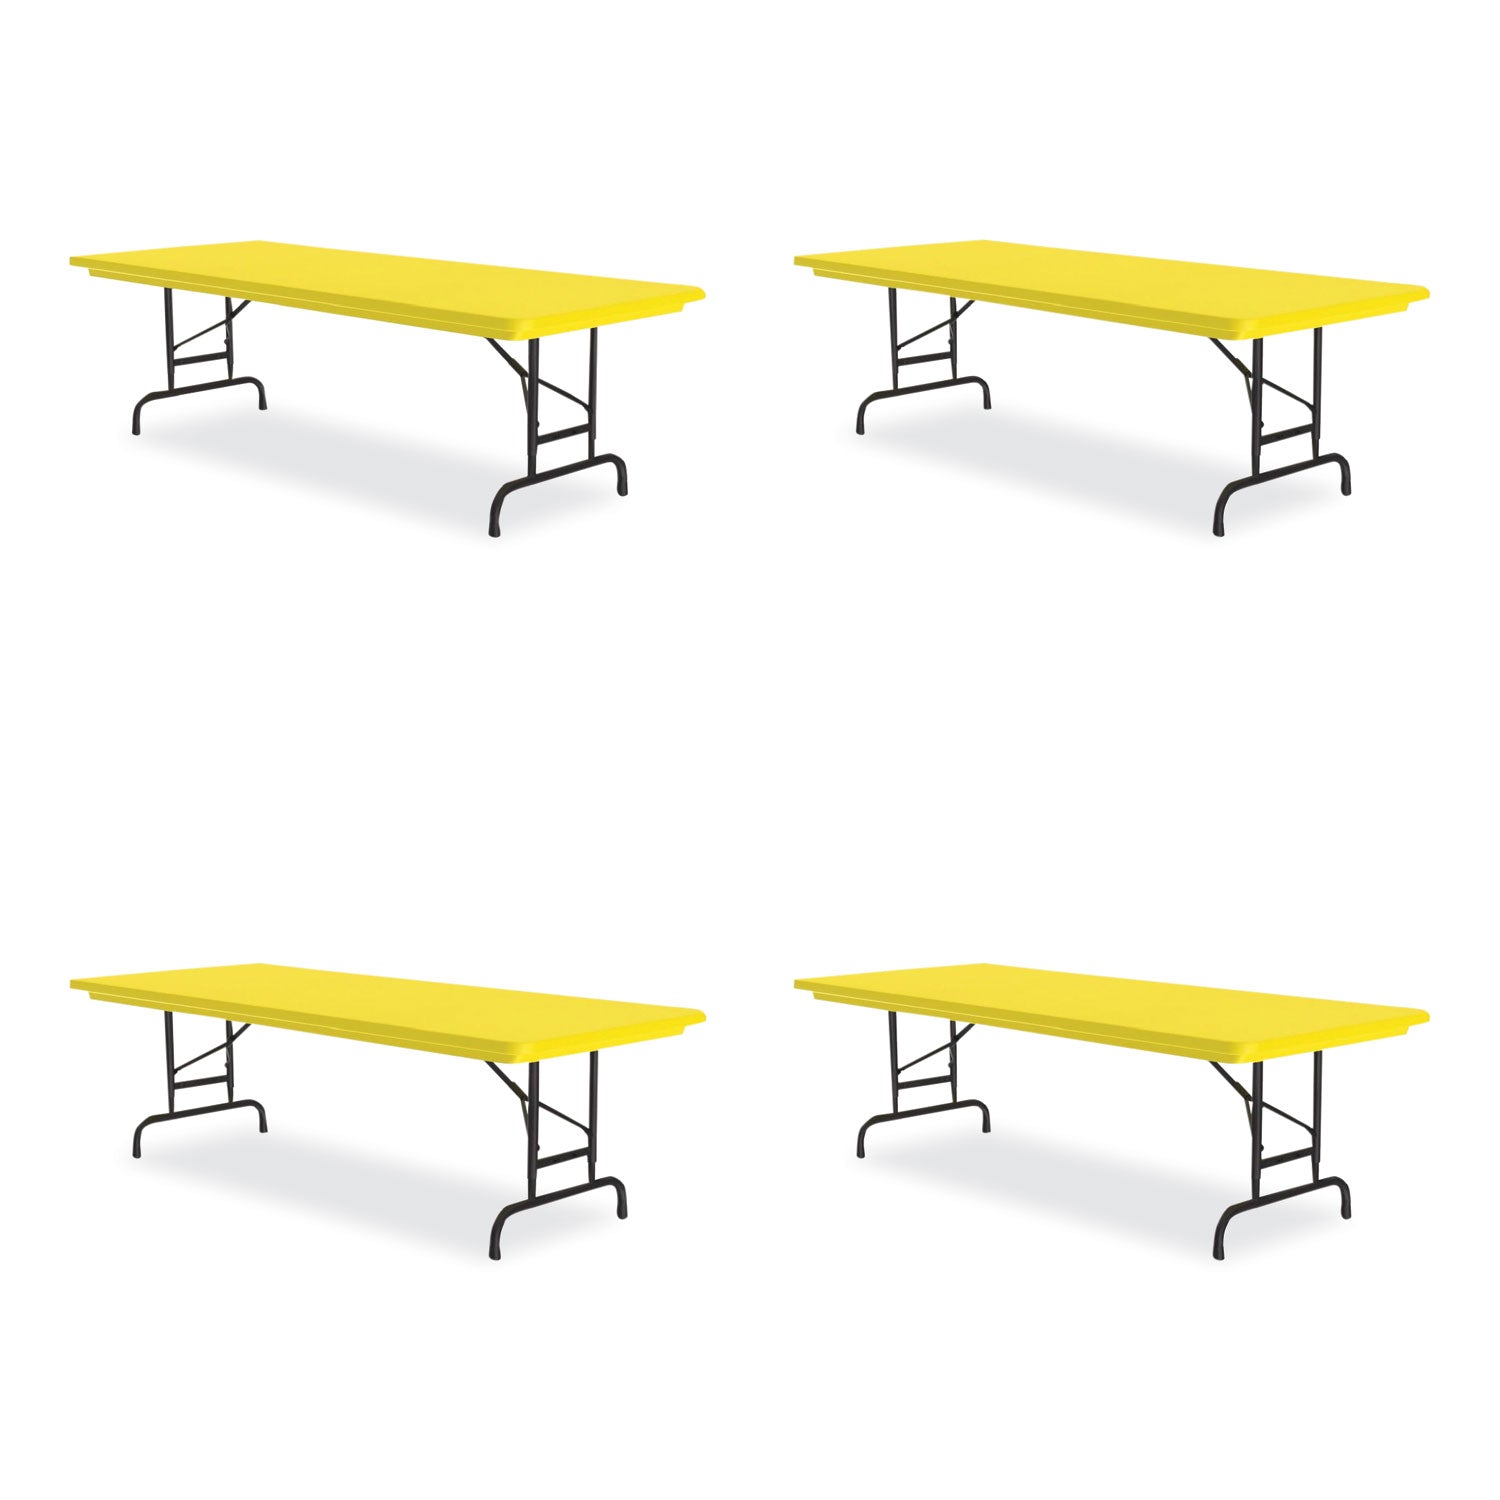 adjustable-folding-tables-rectangular-60-x-30-x-22-to-32-yellow-top-black-legs-4-pallet-ships-in-4-6-business-days_crlra3060284p - 1